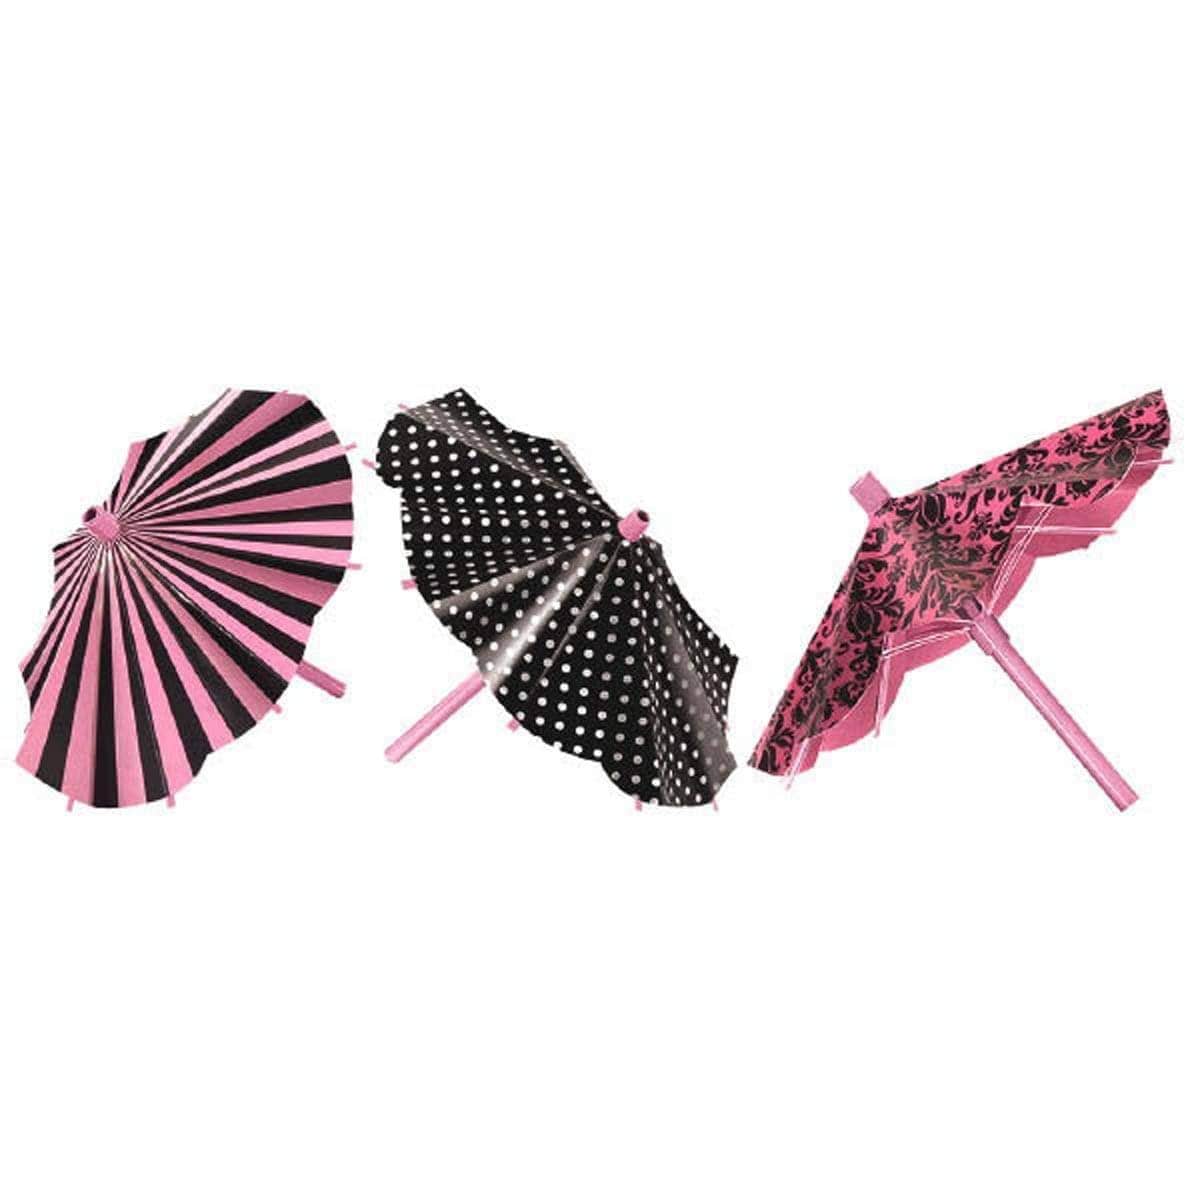 Buy Theme Party Day In Paris Parasol Decorations 15 Inches, 3 per Package sold at Party Expert